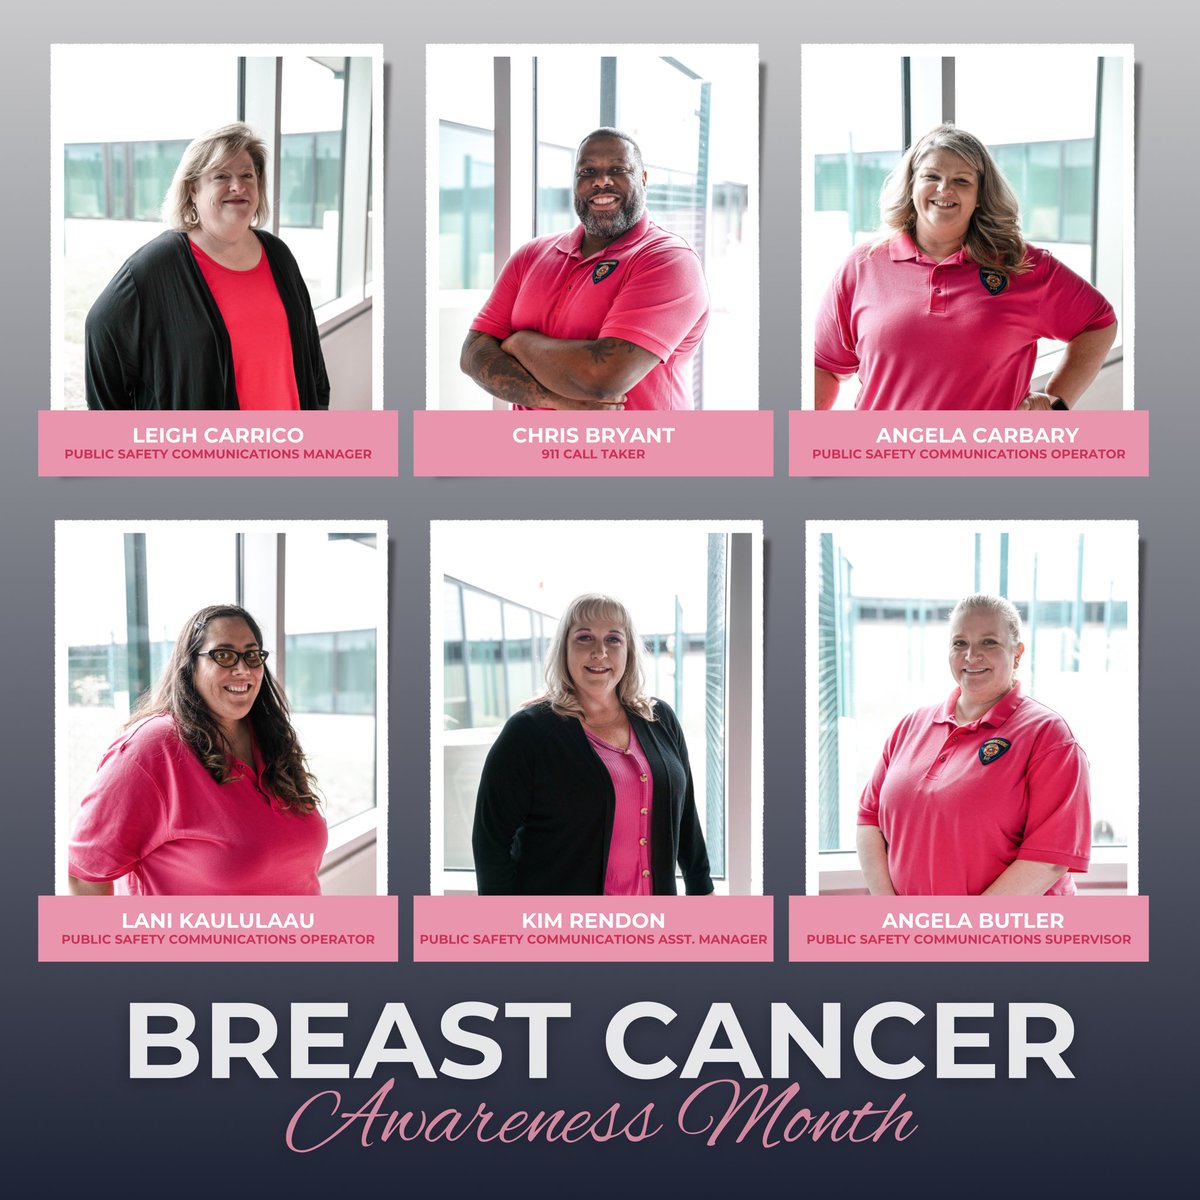 Breast cancer is the second most common cancer among women. Throughout the month, our dispatchers are wearing pink to raise awareness and honor those impacted by breast cancer.💗   #BreastCancerAwareness